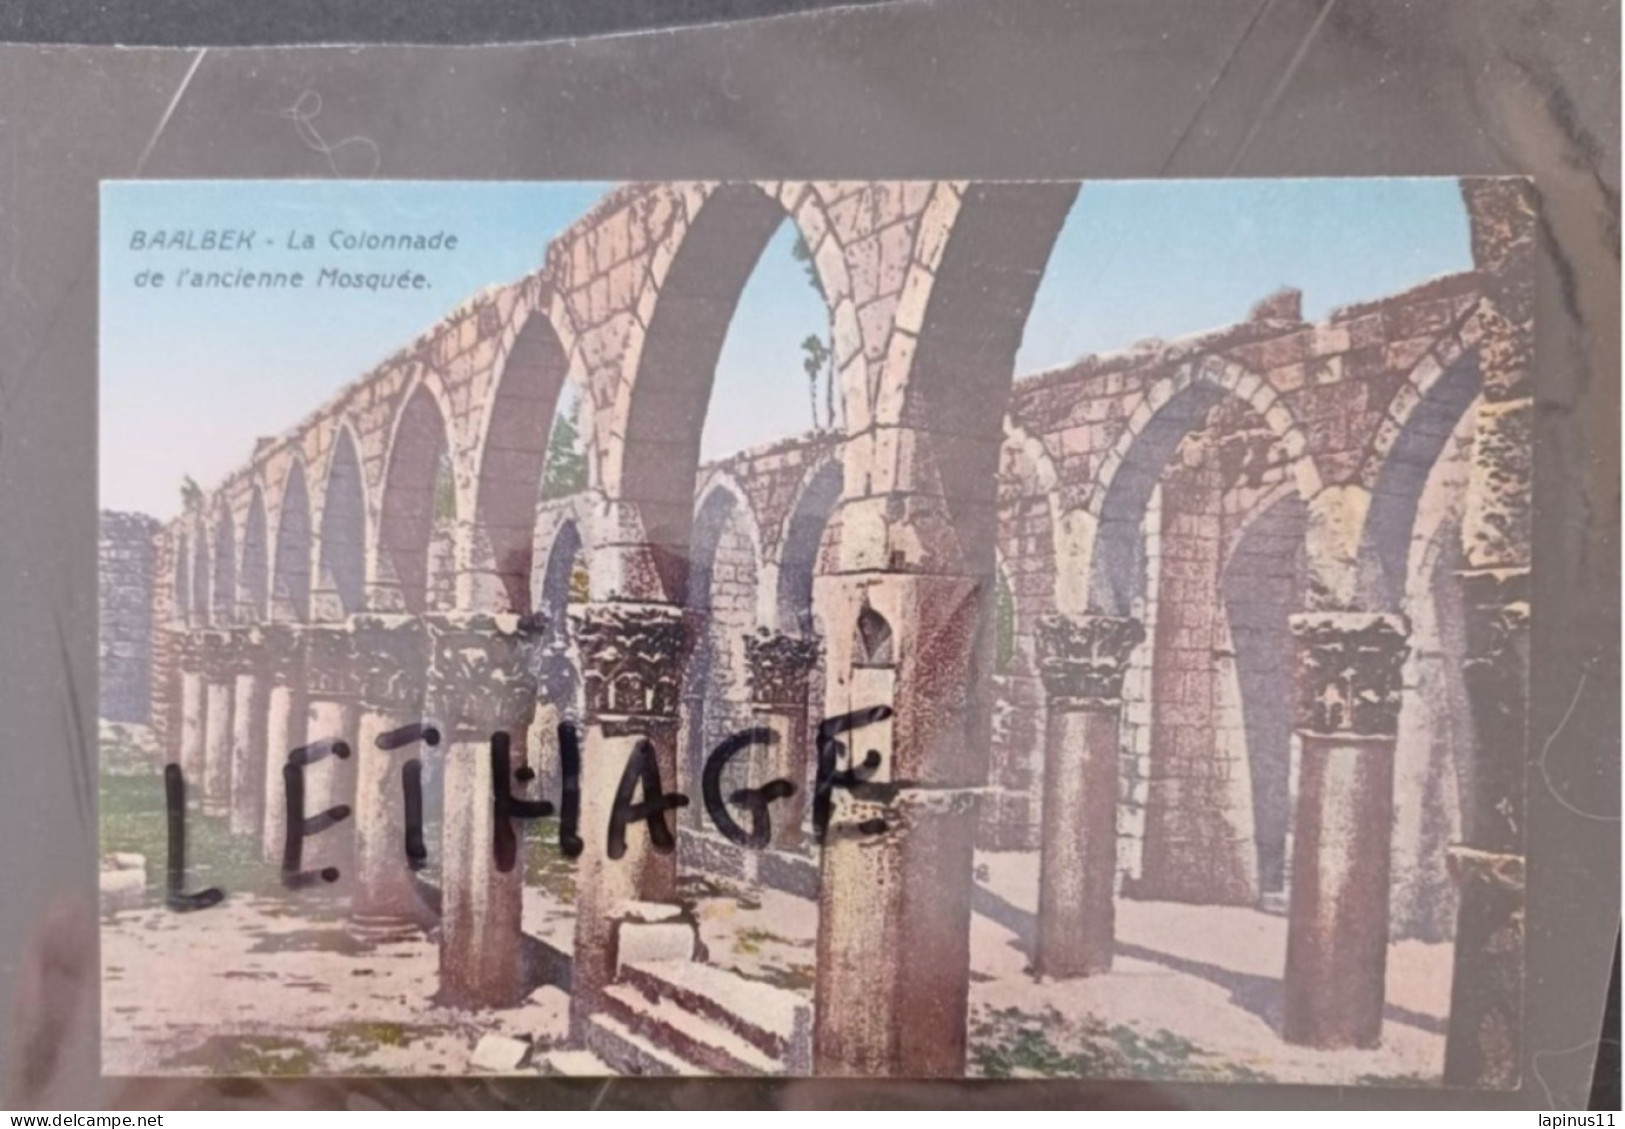 LIBAN BAALBECK COLONNADE MOSQUEE POSTCARD NEW TYPOGRAPHIC PRINT PRODUCED BY SARRAFIAN BROS BEIRUT (COLLECTOR'S)#1/169 - Lebanon